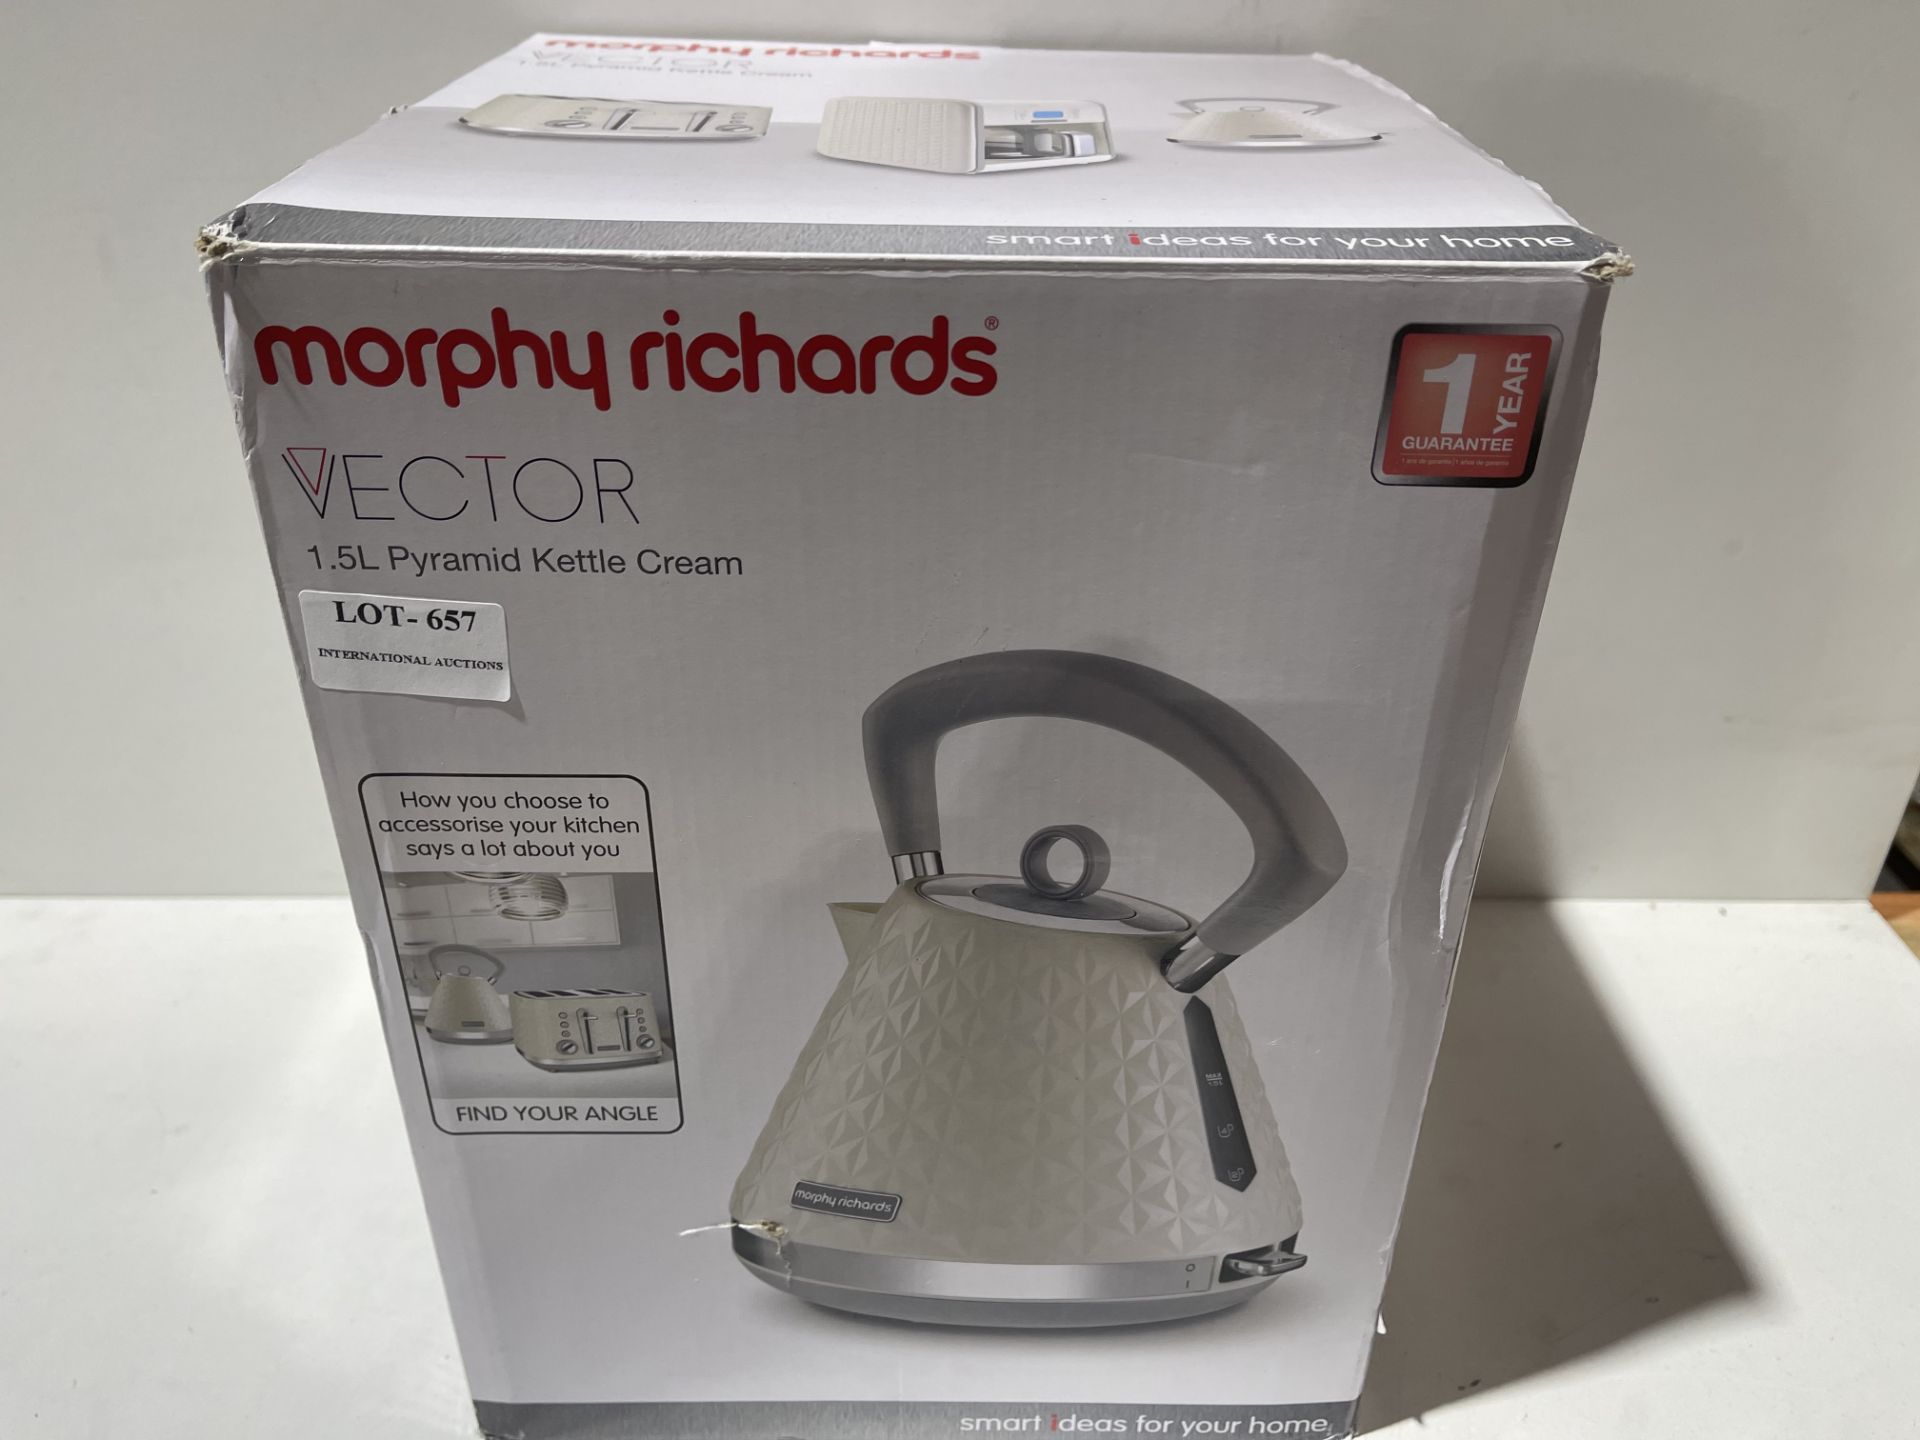 Morphy Richards Vector Pyramid Kettle 108132 Traditional Kettle Cream Â£29.99Condition